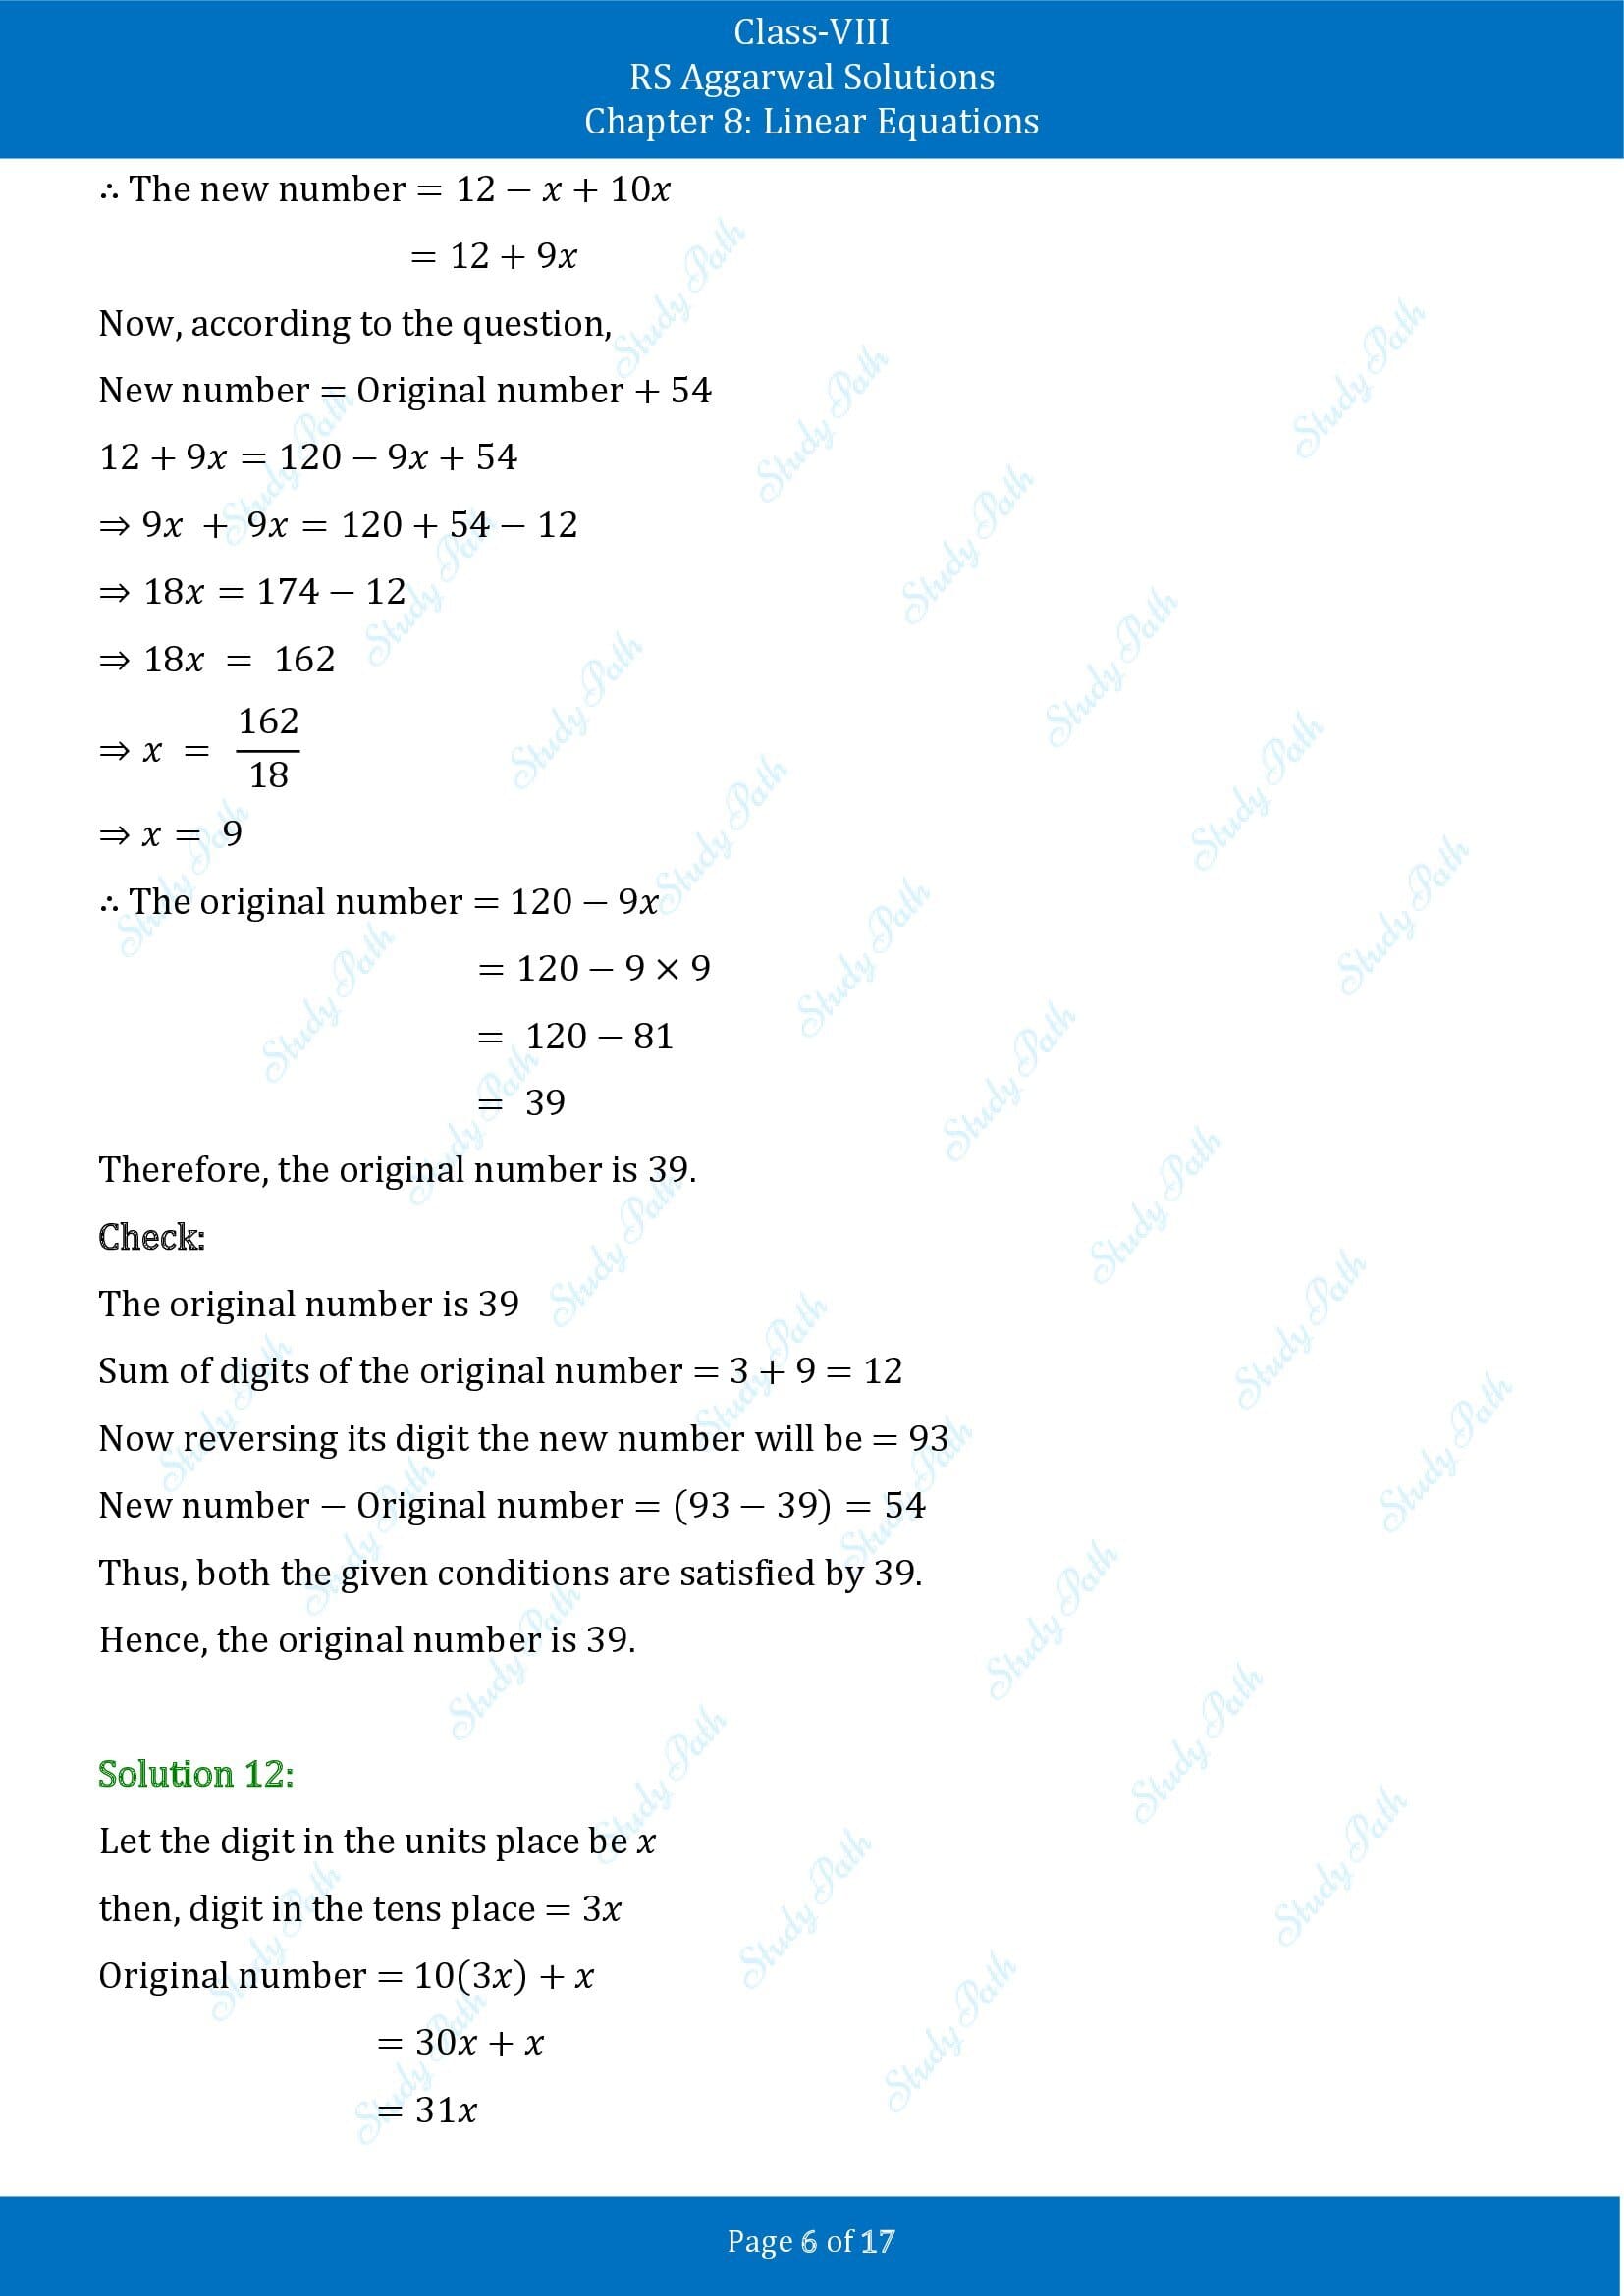 RS Aggarwal Solutions Class 8 Chapter 8 Linear Equations Exercise 8B 00006